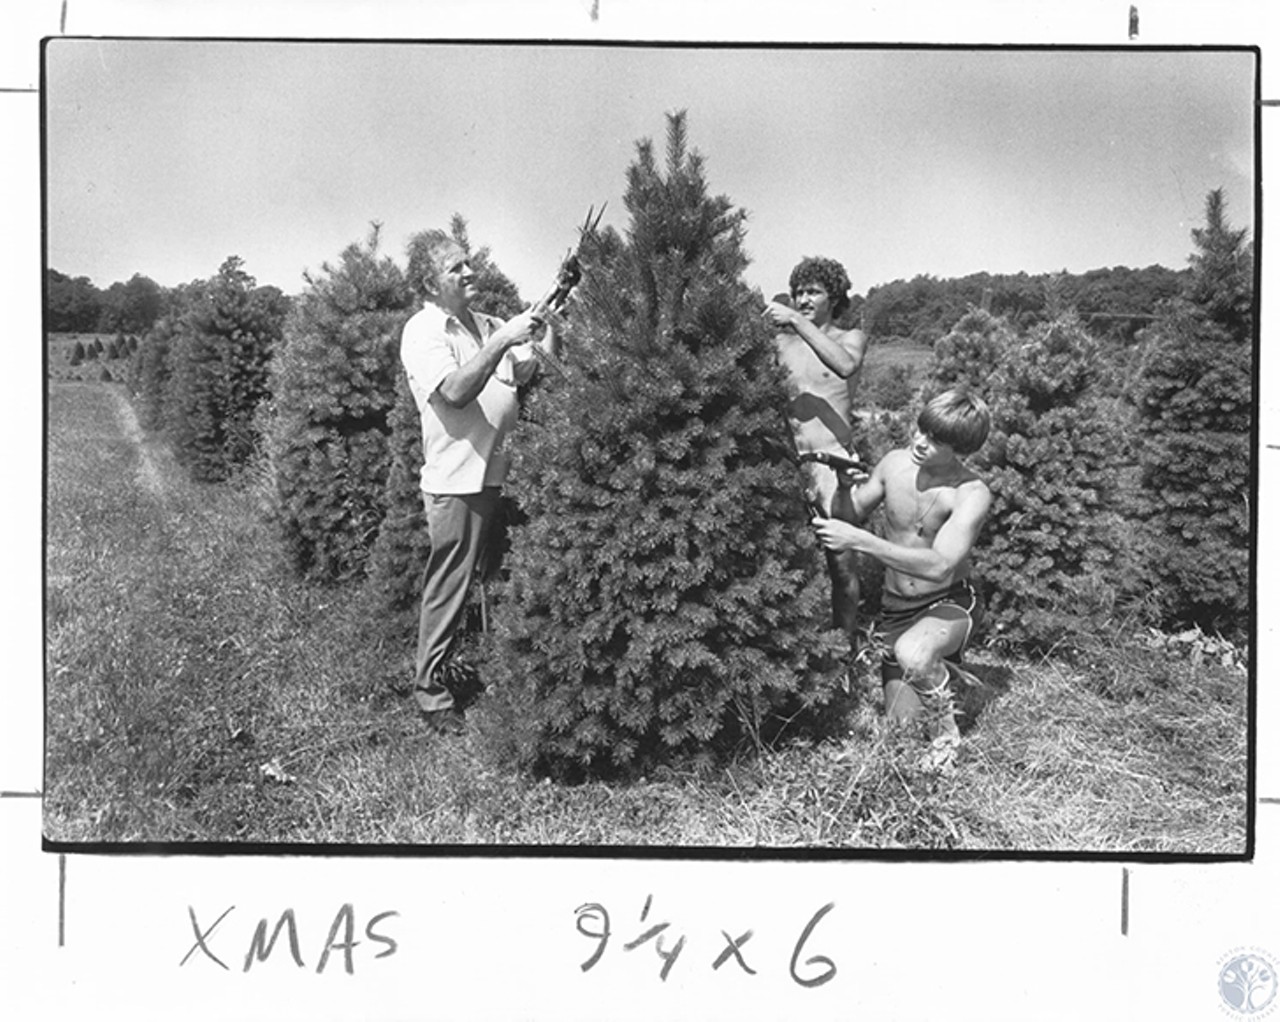 Hebron, 1980
"Burr Reeves, Dan Mai (15), Bob Reeves (19) trimming and pruning Christmas trees at Reeves Farm"